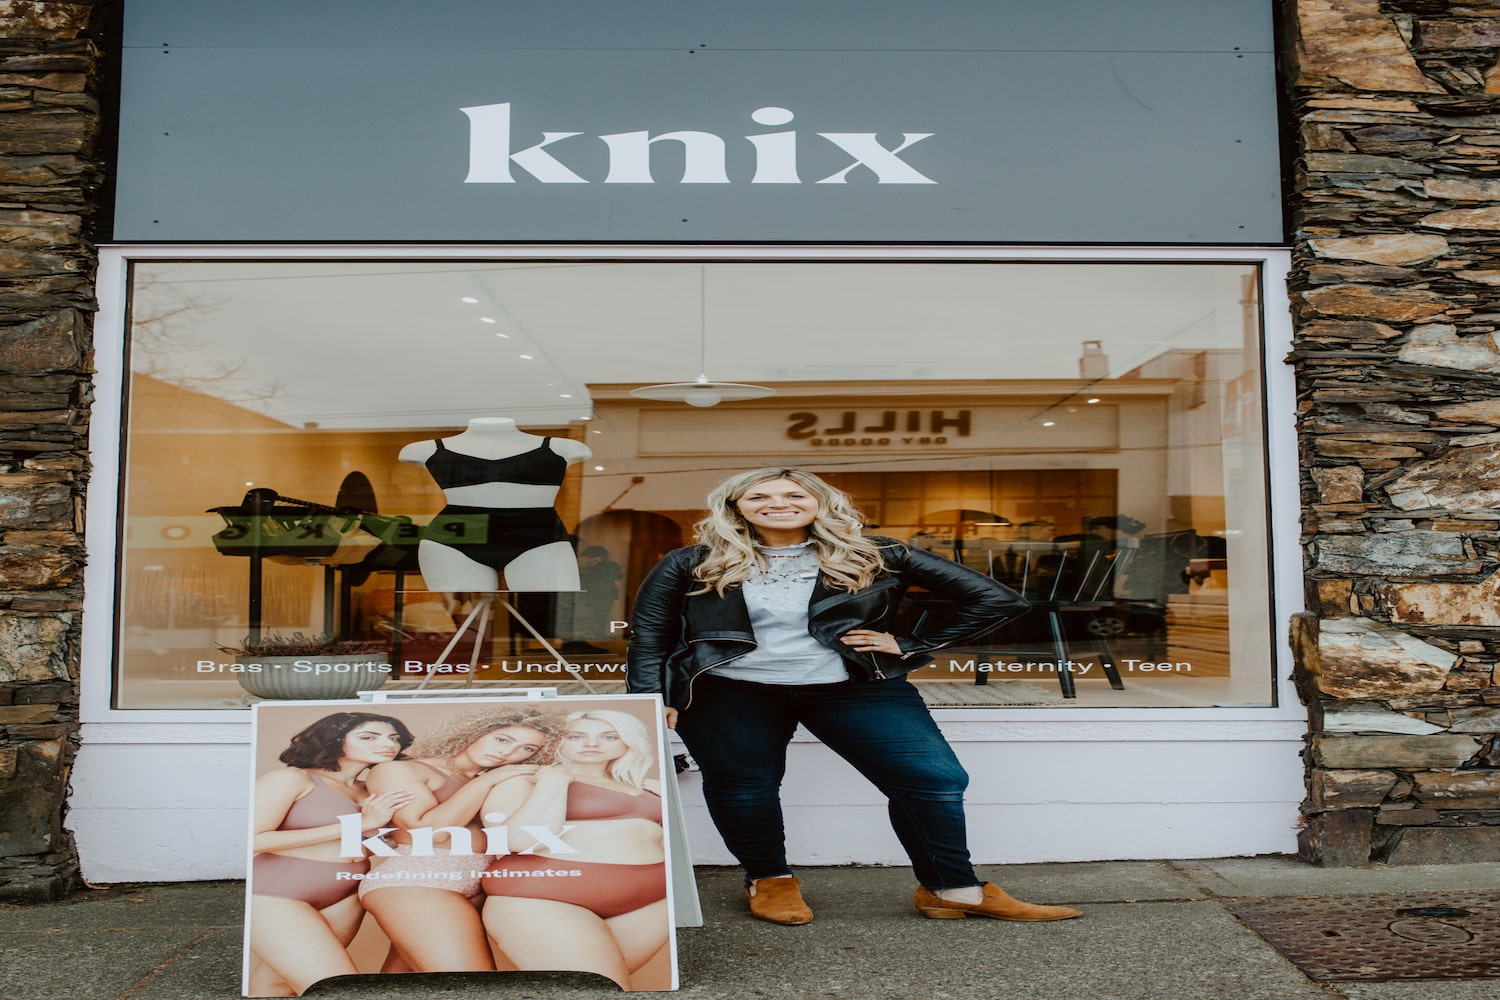 As it expands, Canadian lingerie brand Knix will need to stay